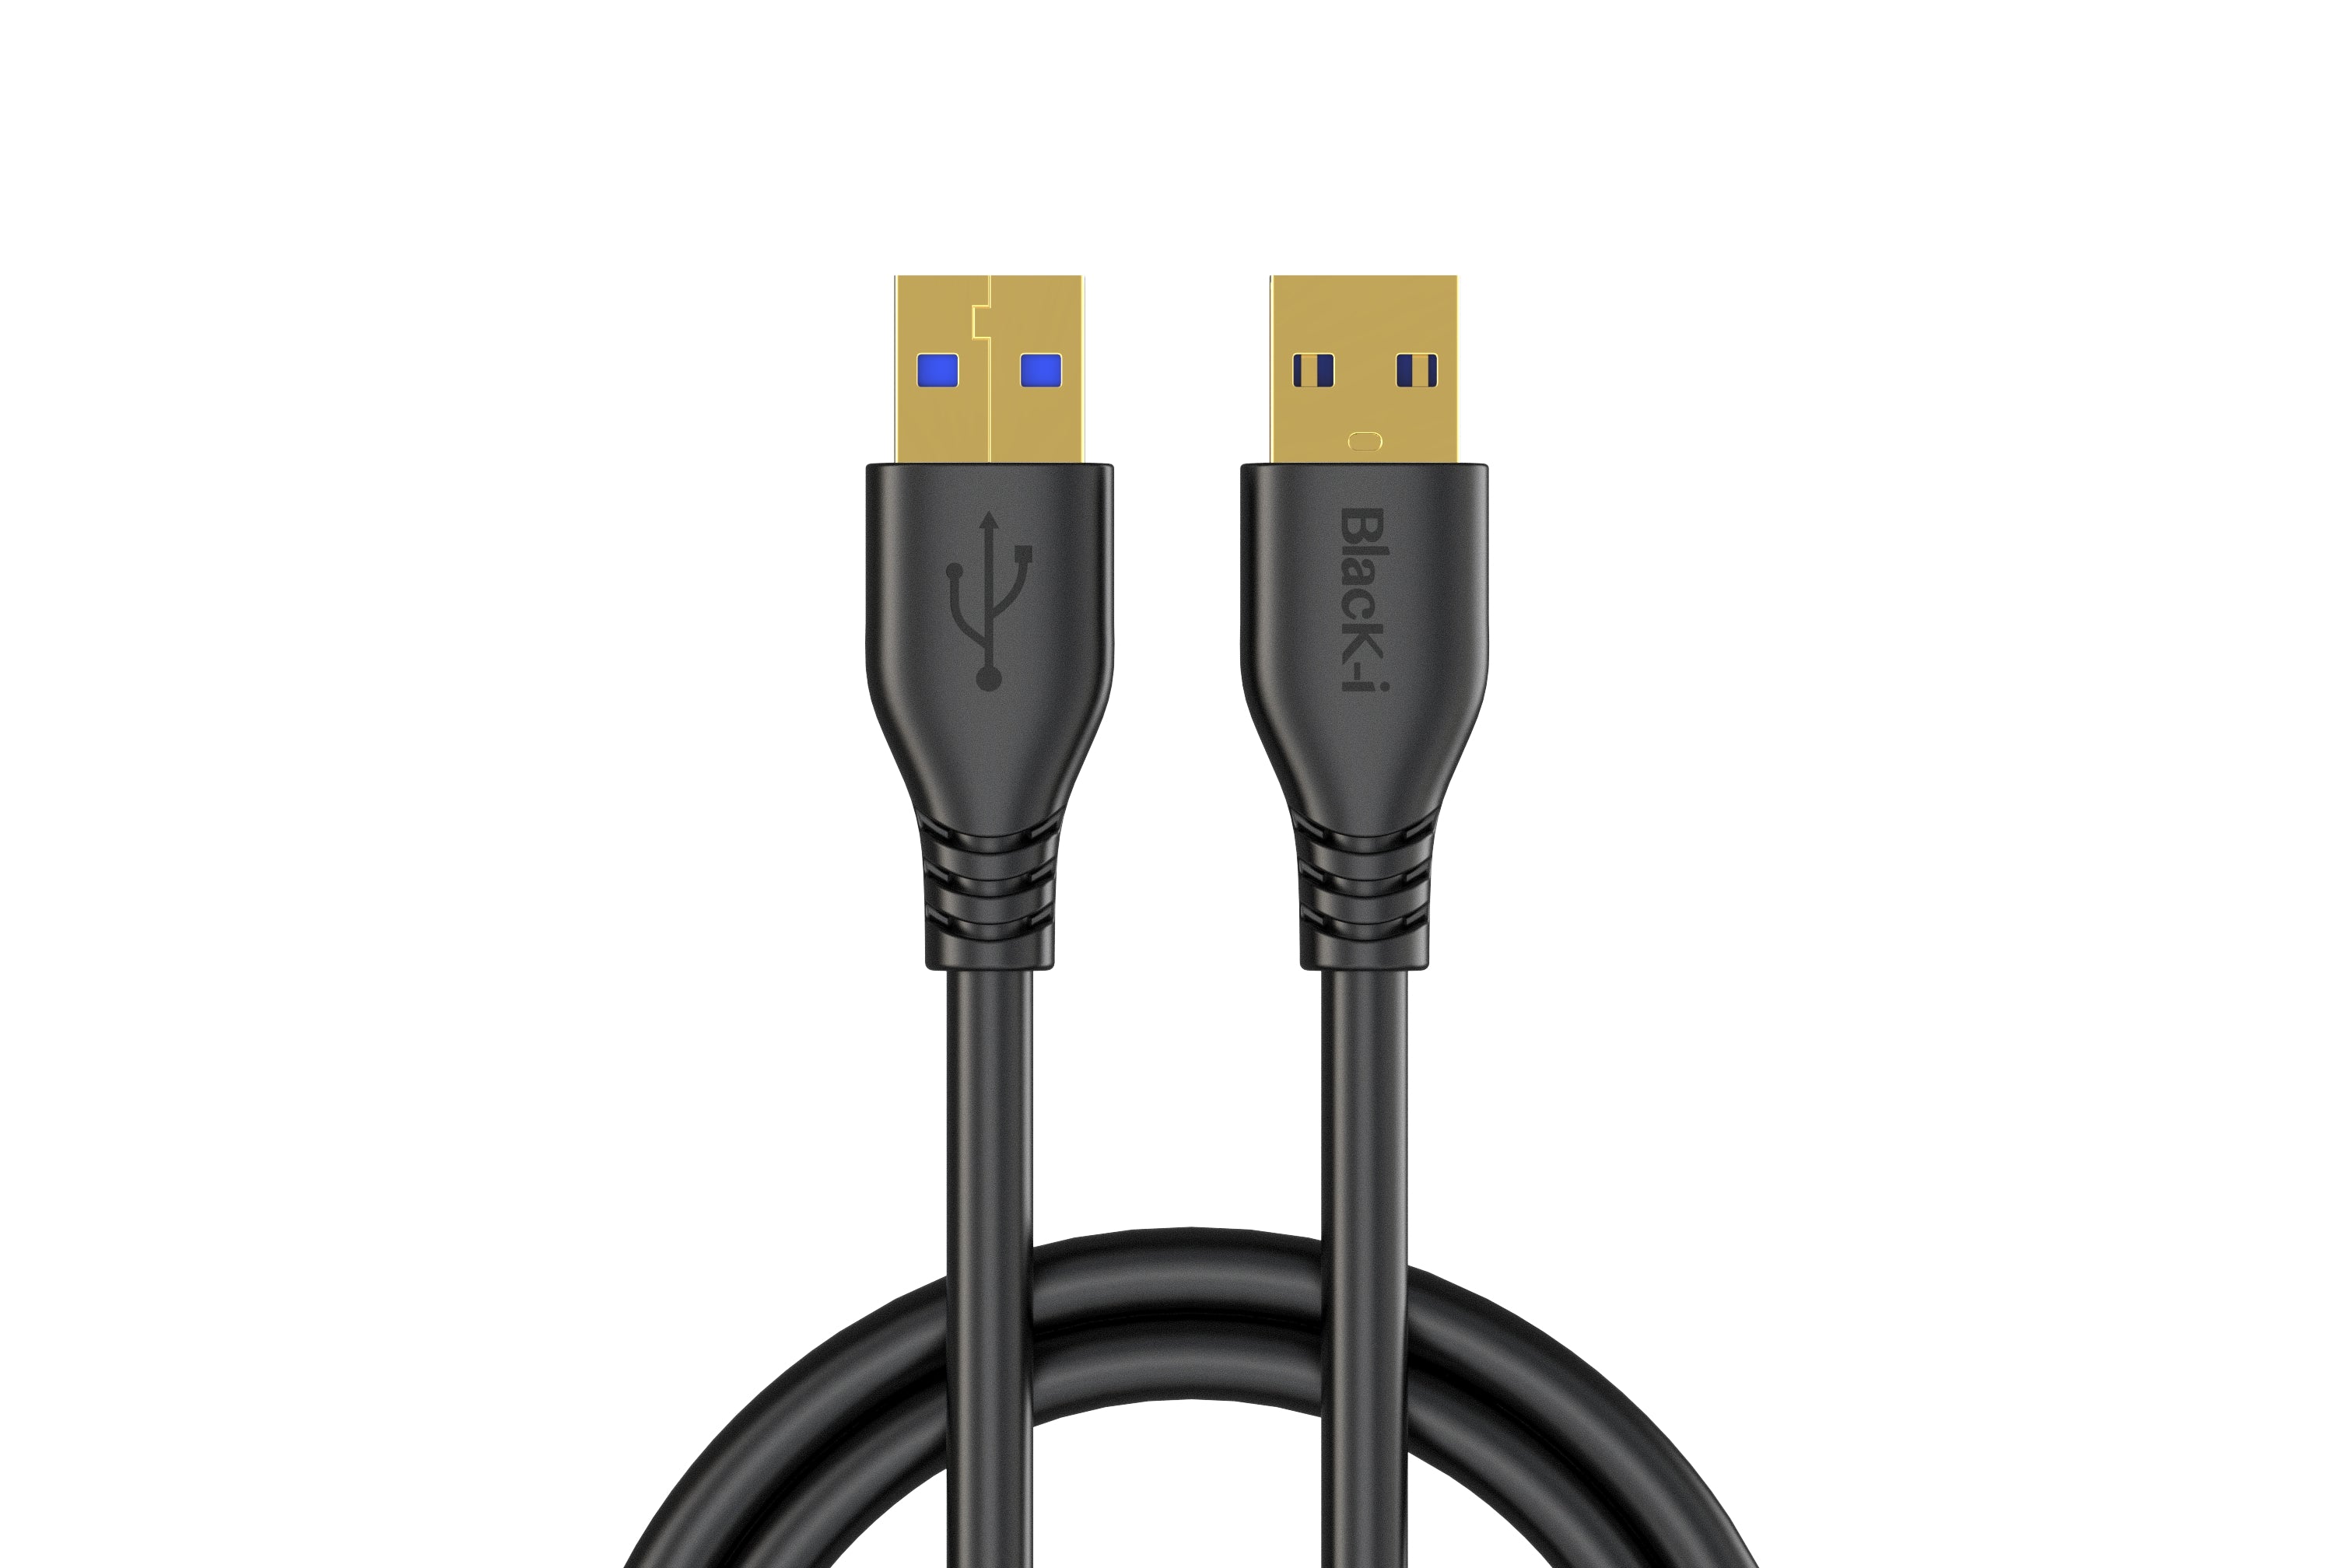 Black-i USB 3.0 Male to Male Cable 2 Meter